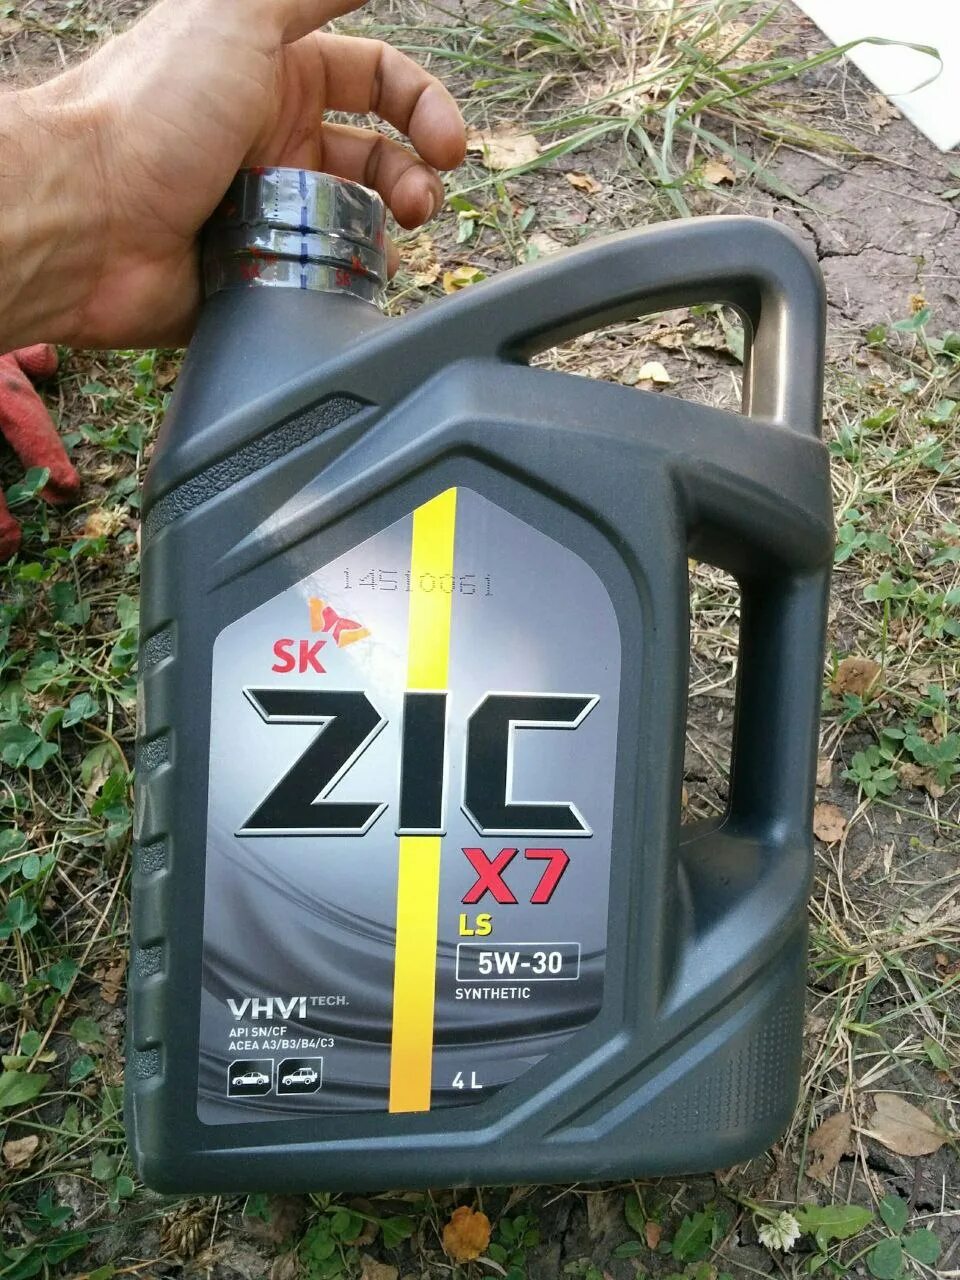 ZIC x7 5w30. ZIC x7 5w30 ( 4л). Моторное масло ZIC x7 5w-30. Моторное масло ZIC x7 LS 5w-30. Масло лс 5